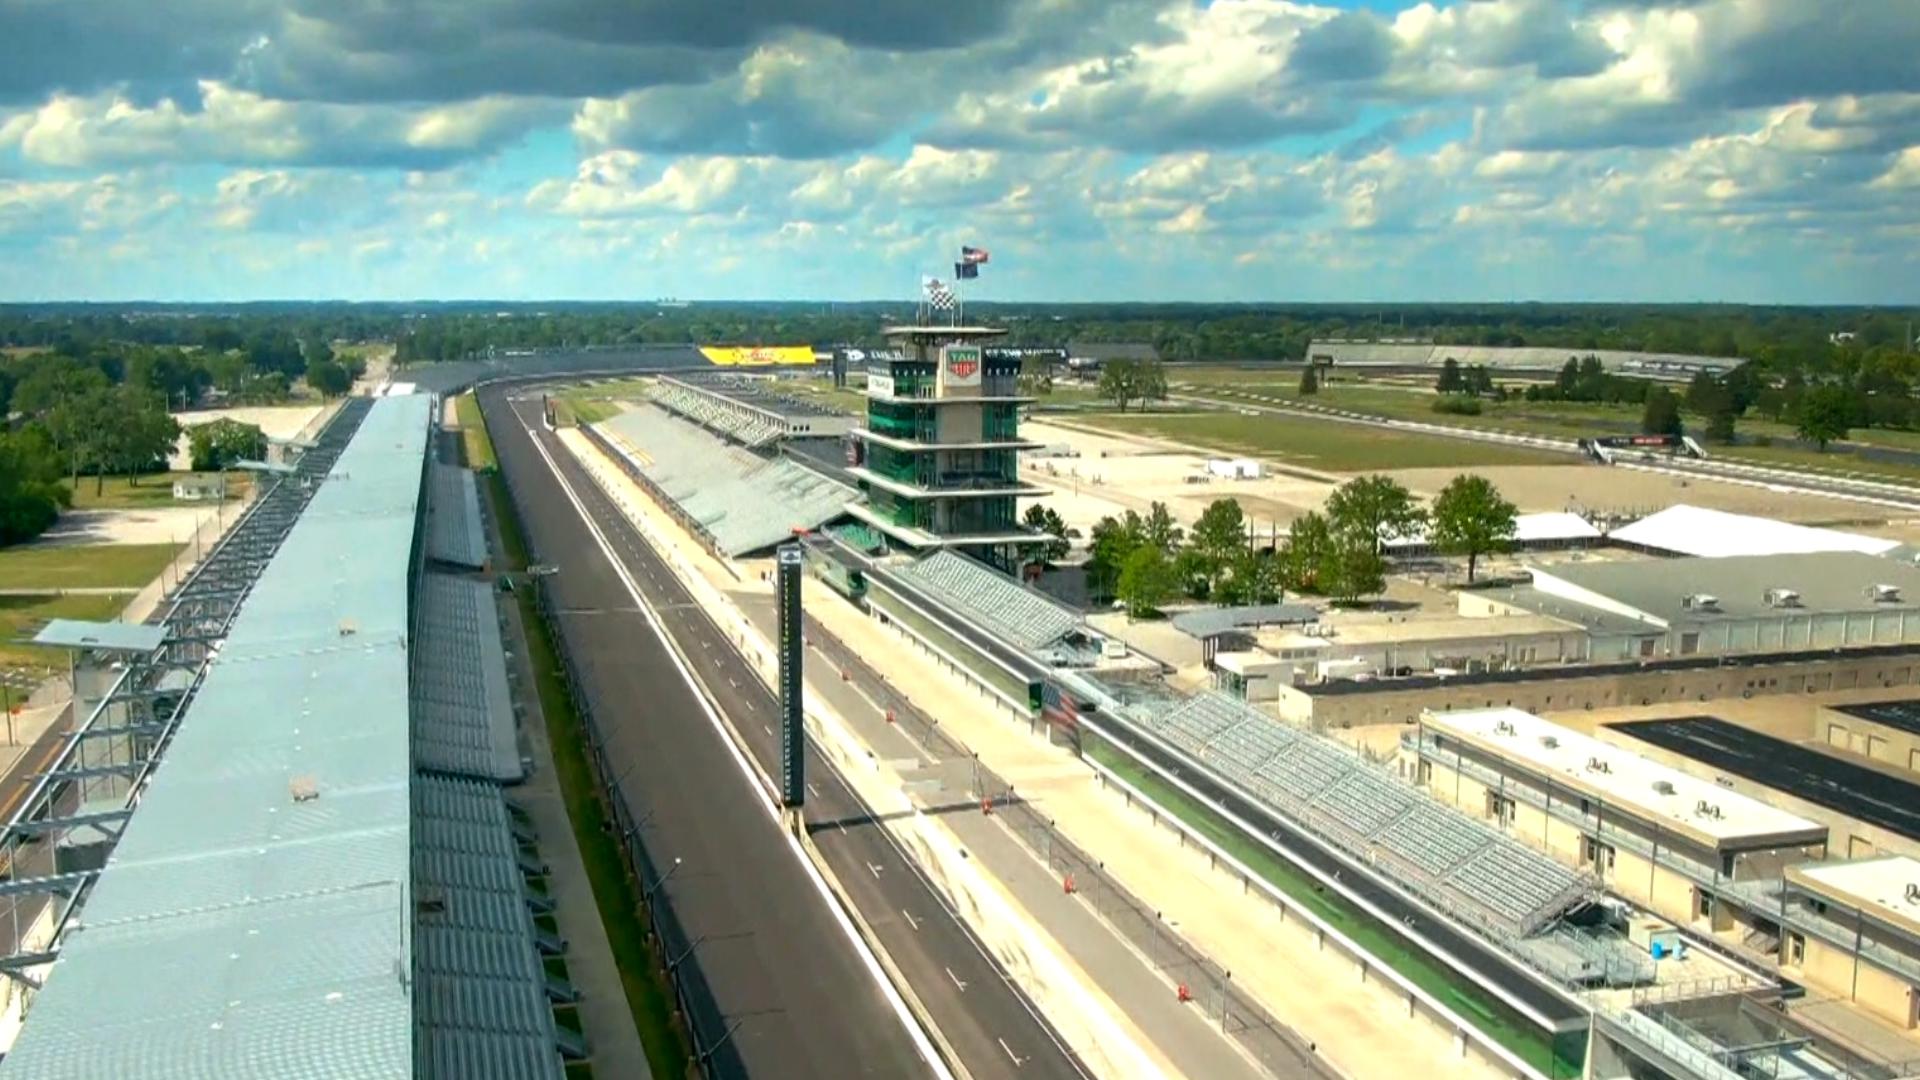 Parking on many streets in the area of the Indianapolis Motor Speedway will be prohibited this weekend.